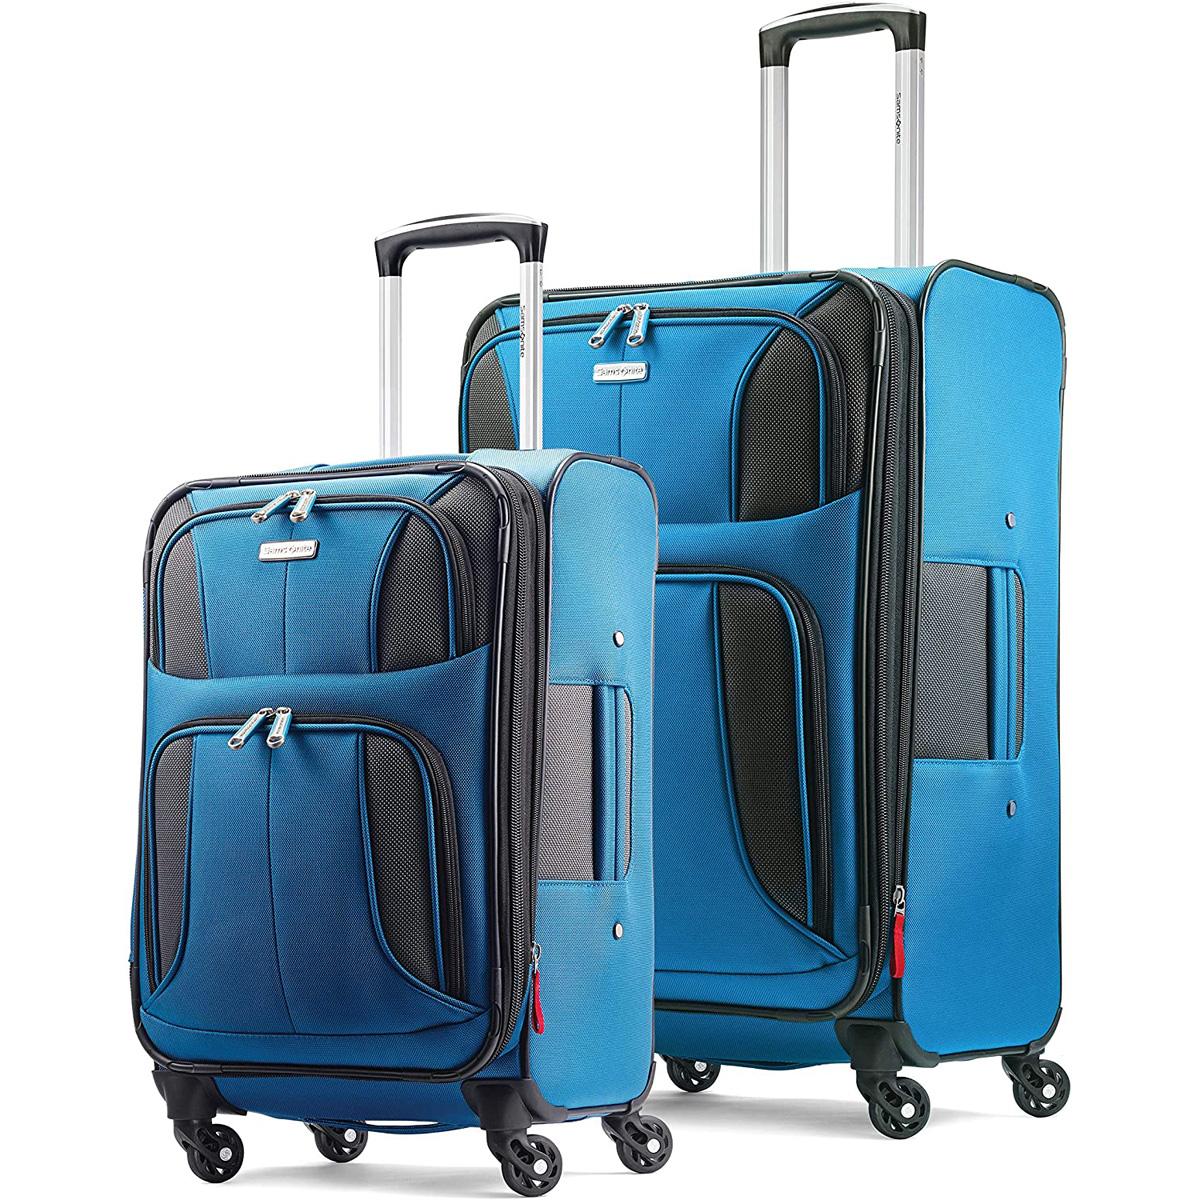 2 Samsonite Aspire Xlite Softside Luggage with Spinner Wheels for $69.99 Shipped